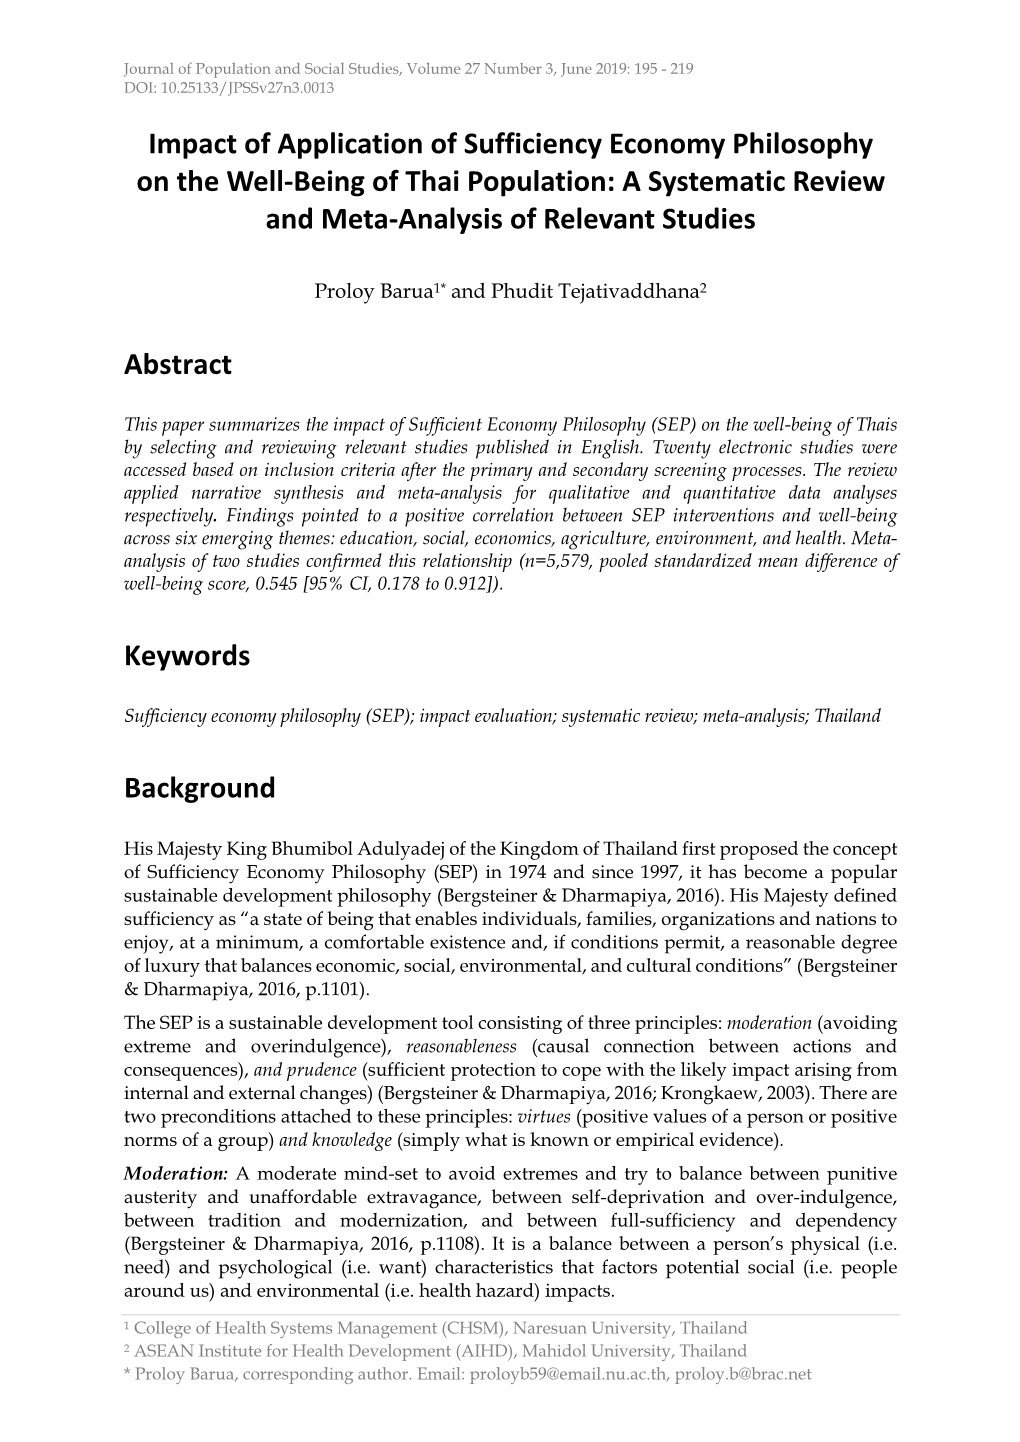 Impact of Application of Sufficiency Economy Philosophy on the Well‐Being of Thai Population: a Systematic Review and Meta‐Analysis of Relevant Studies